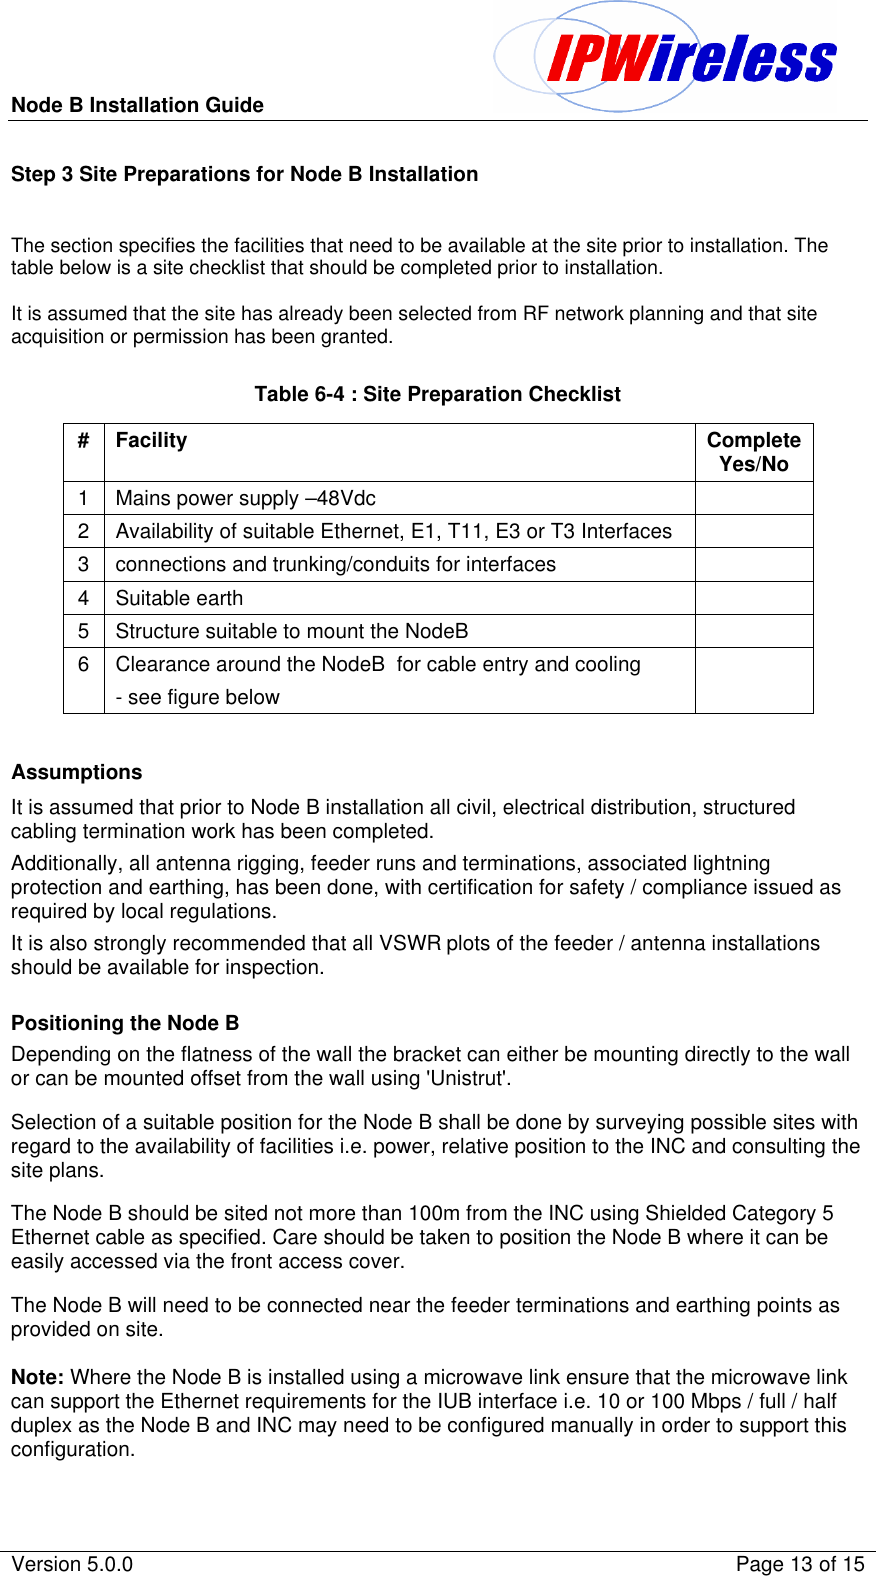 Node B Installation Guide                                               Version 5.0.0    Page 13 of 15  Step 3 Site Preparations for Node B Installation  The section specifies the facilities that need to be available at the site prior to installation. The table below is a site checklist that should be completed prior to installation.  It is assumed that the site has already been selected from RF network planning and that site acquisition or permission has been granted.  Table 6-4 : Site Preparation Checklist # Facility Complete Yes/No 1 Mains power supply –48Vdc   2 Availability of suitable Ethernet, E1, T11, E3 or T3 Interfaces   3 connections and trunking/conduits for interfaces   4 Suitable earth   5 Structure suitable to mount the NodeB   6 Clearance around the NodeB  for cable entry and cooling - see figure below    Assumptions It is assumed that prior to Node B installation all civil, electrical distribution, structured cabling termination work has been completed. Additionally, all antenna rigging, feeder runs and terminations, associated lightning protection and earthing, has been done, with certification for safety / compliance issued as required by local regulations.  It is also strongly recommended that all VSWR plots of the feeder / antenna installations should be available for inspection.  Positioning the Node B Depending on the flatness of the wall the bracket can either be mounting directly to the wall or can be mounted offset from the wall using &apos;Unistrut&apos;. Selection of a suitable position for the Node B shall be done by surveying possible sites with regard to the availability of facilities i.e. power, relative position to the INC and consulting the site plans. The Node B should be sited not more than 100m from the INC using Shielded Category 5 Ethernet cable as specified. Care should be taken to position the Node B where it can be easily accessed via the front access cover. The Node B will need to be connected near the feeder terminations and earthing points as provided on site.  Note: Where the Node B is installed using a microwave link ensure that the microwave link can support the Ethernet requirements for the IUB interface i.e. 10 or 100 Mbps / full / half duplex as the Node B and INC may need to be configured manually in order to support this configuration. 